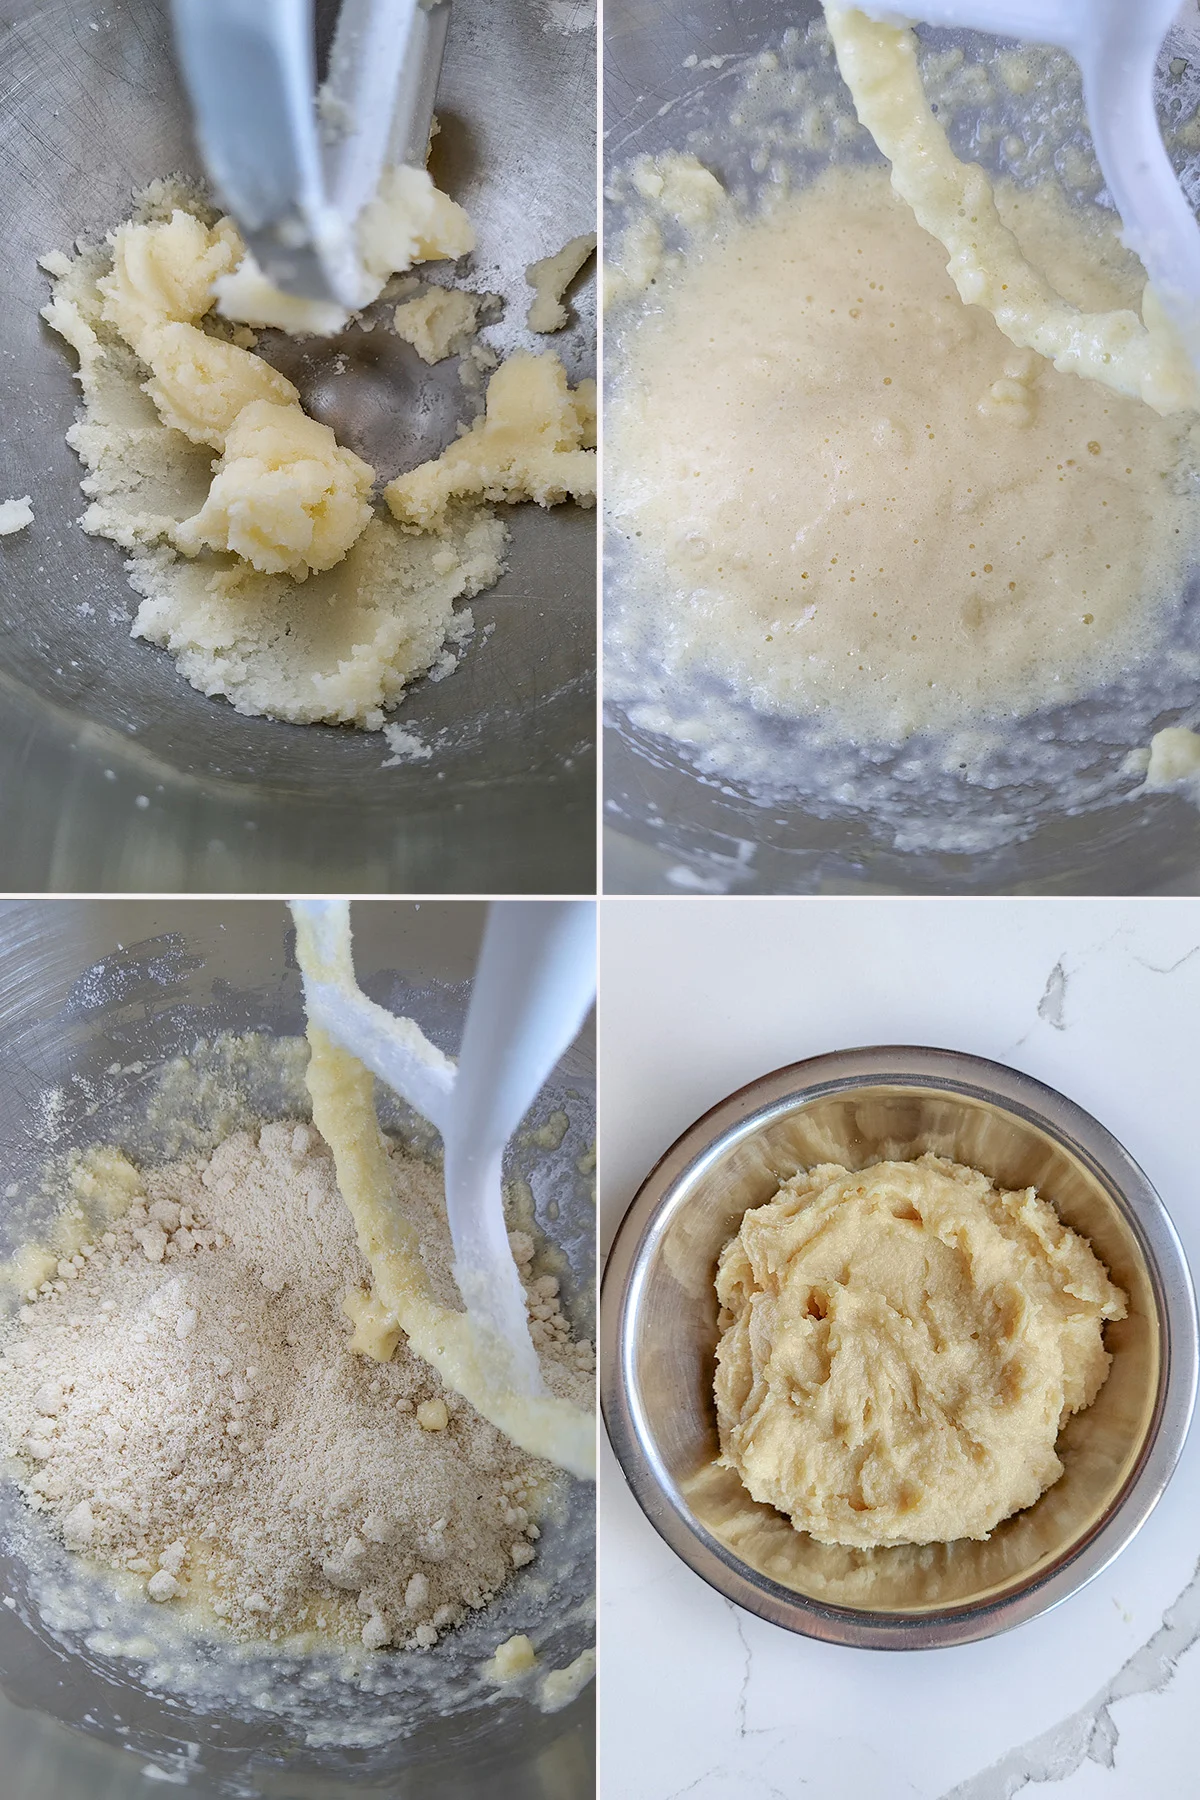 butter, sugar, eggs and almond flour in a mixing bowl.